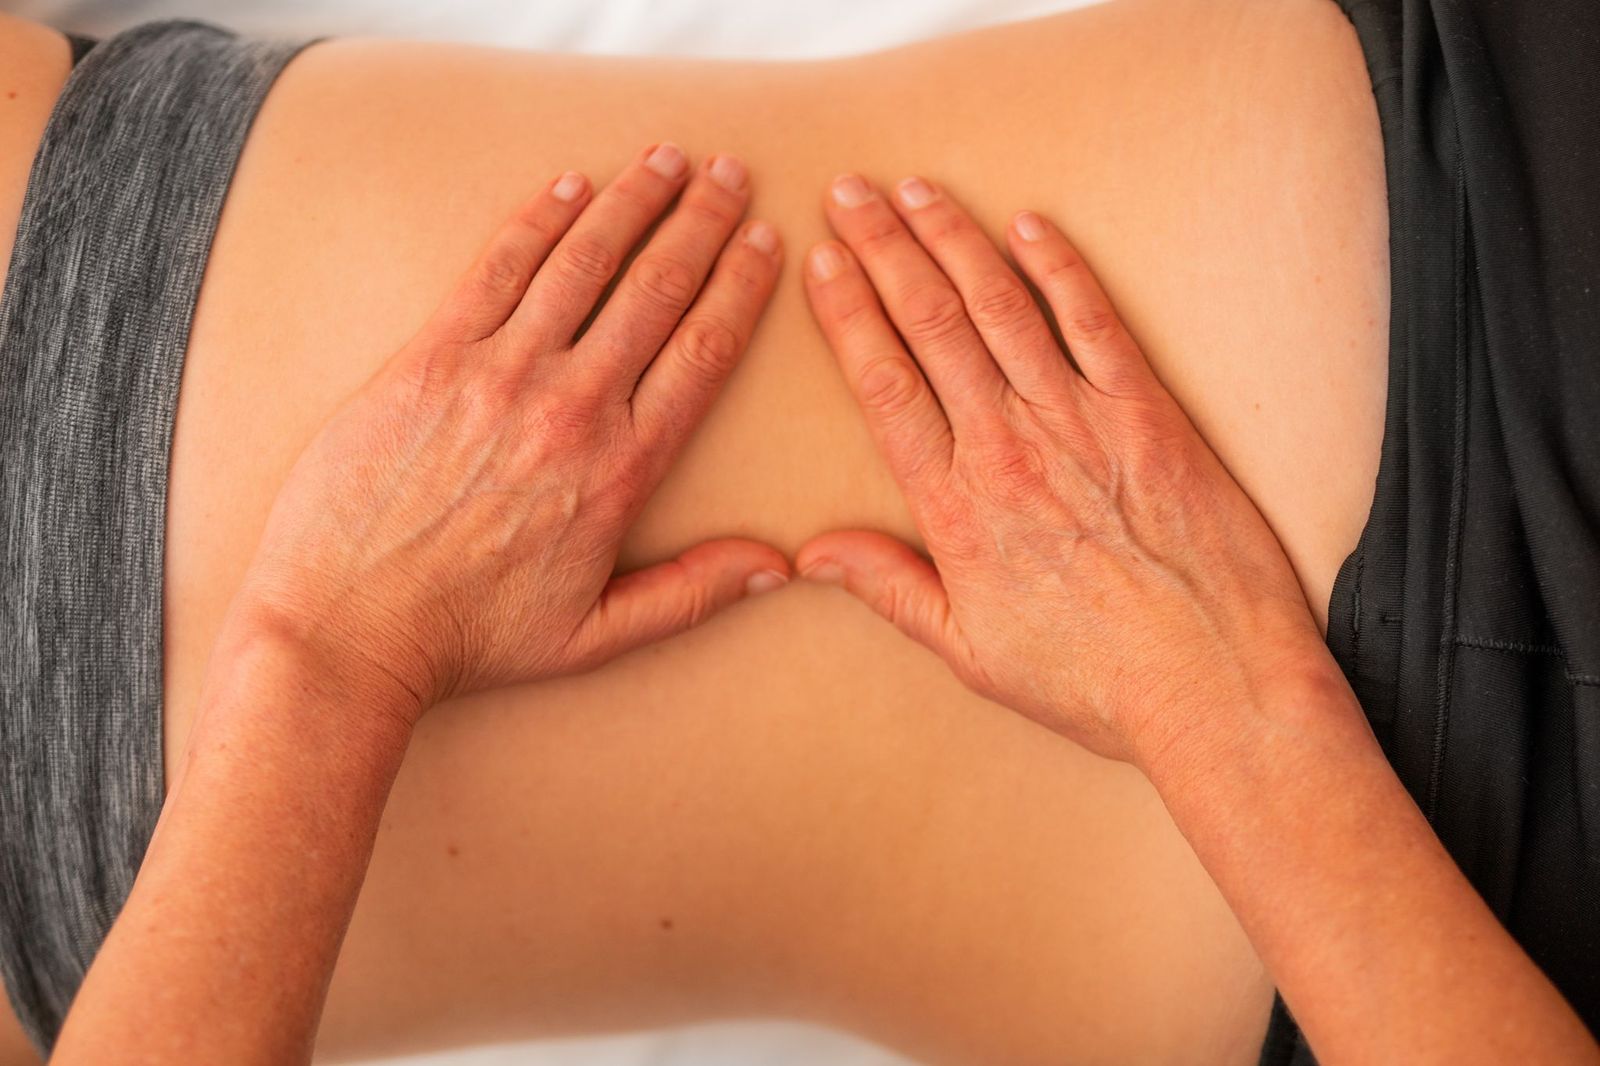 Common Causes Of Back Pain